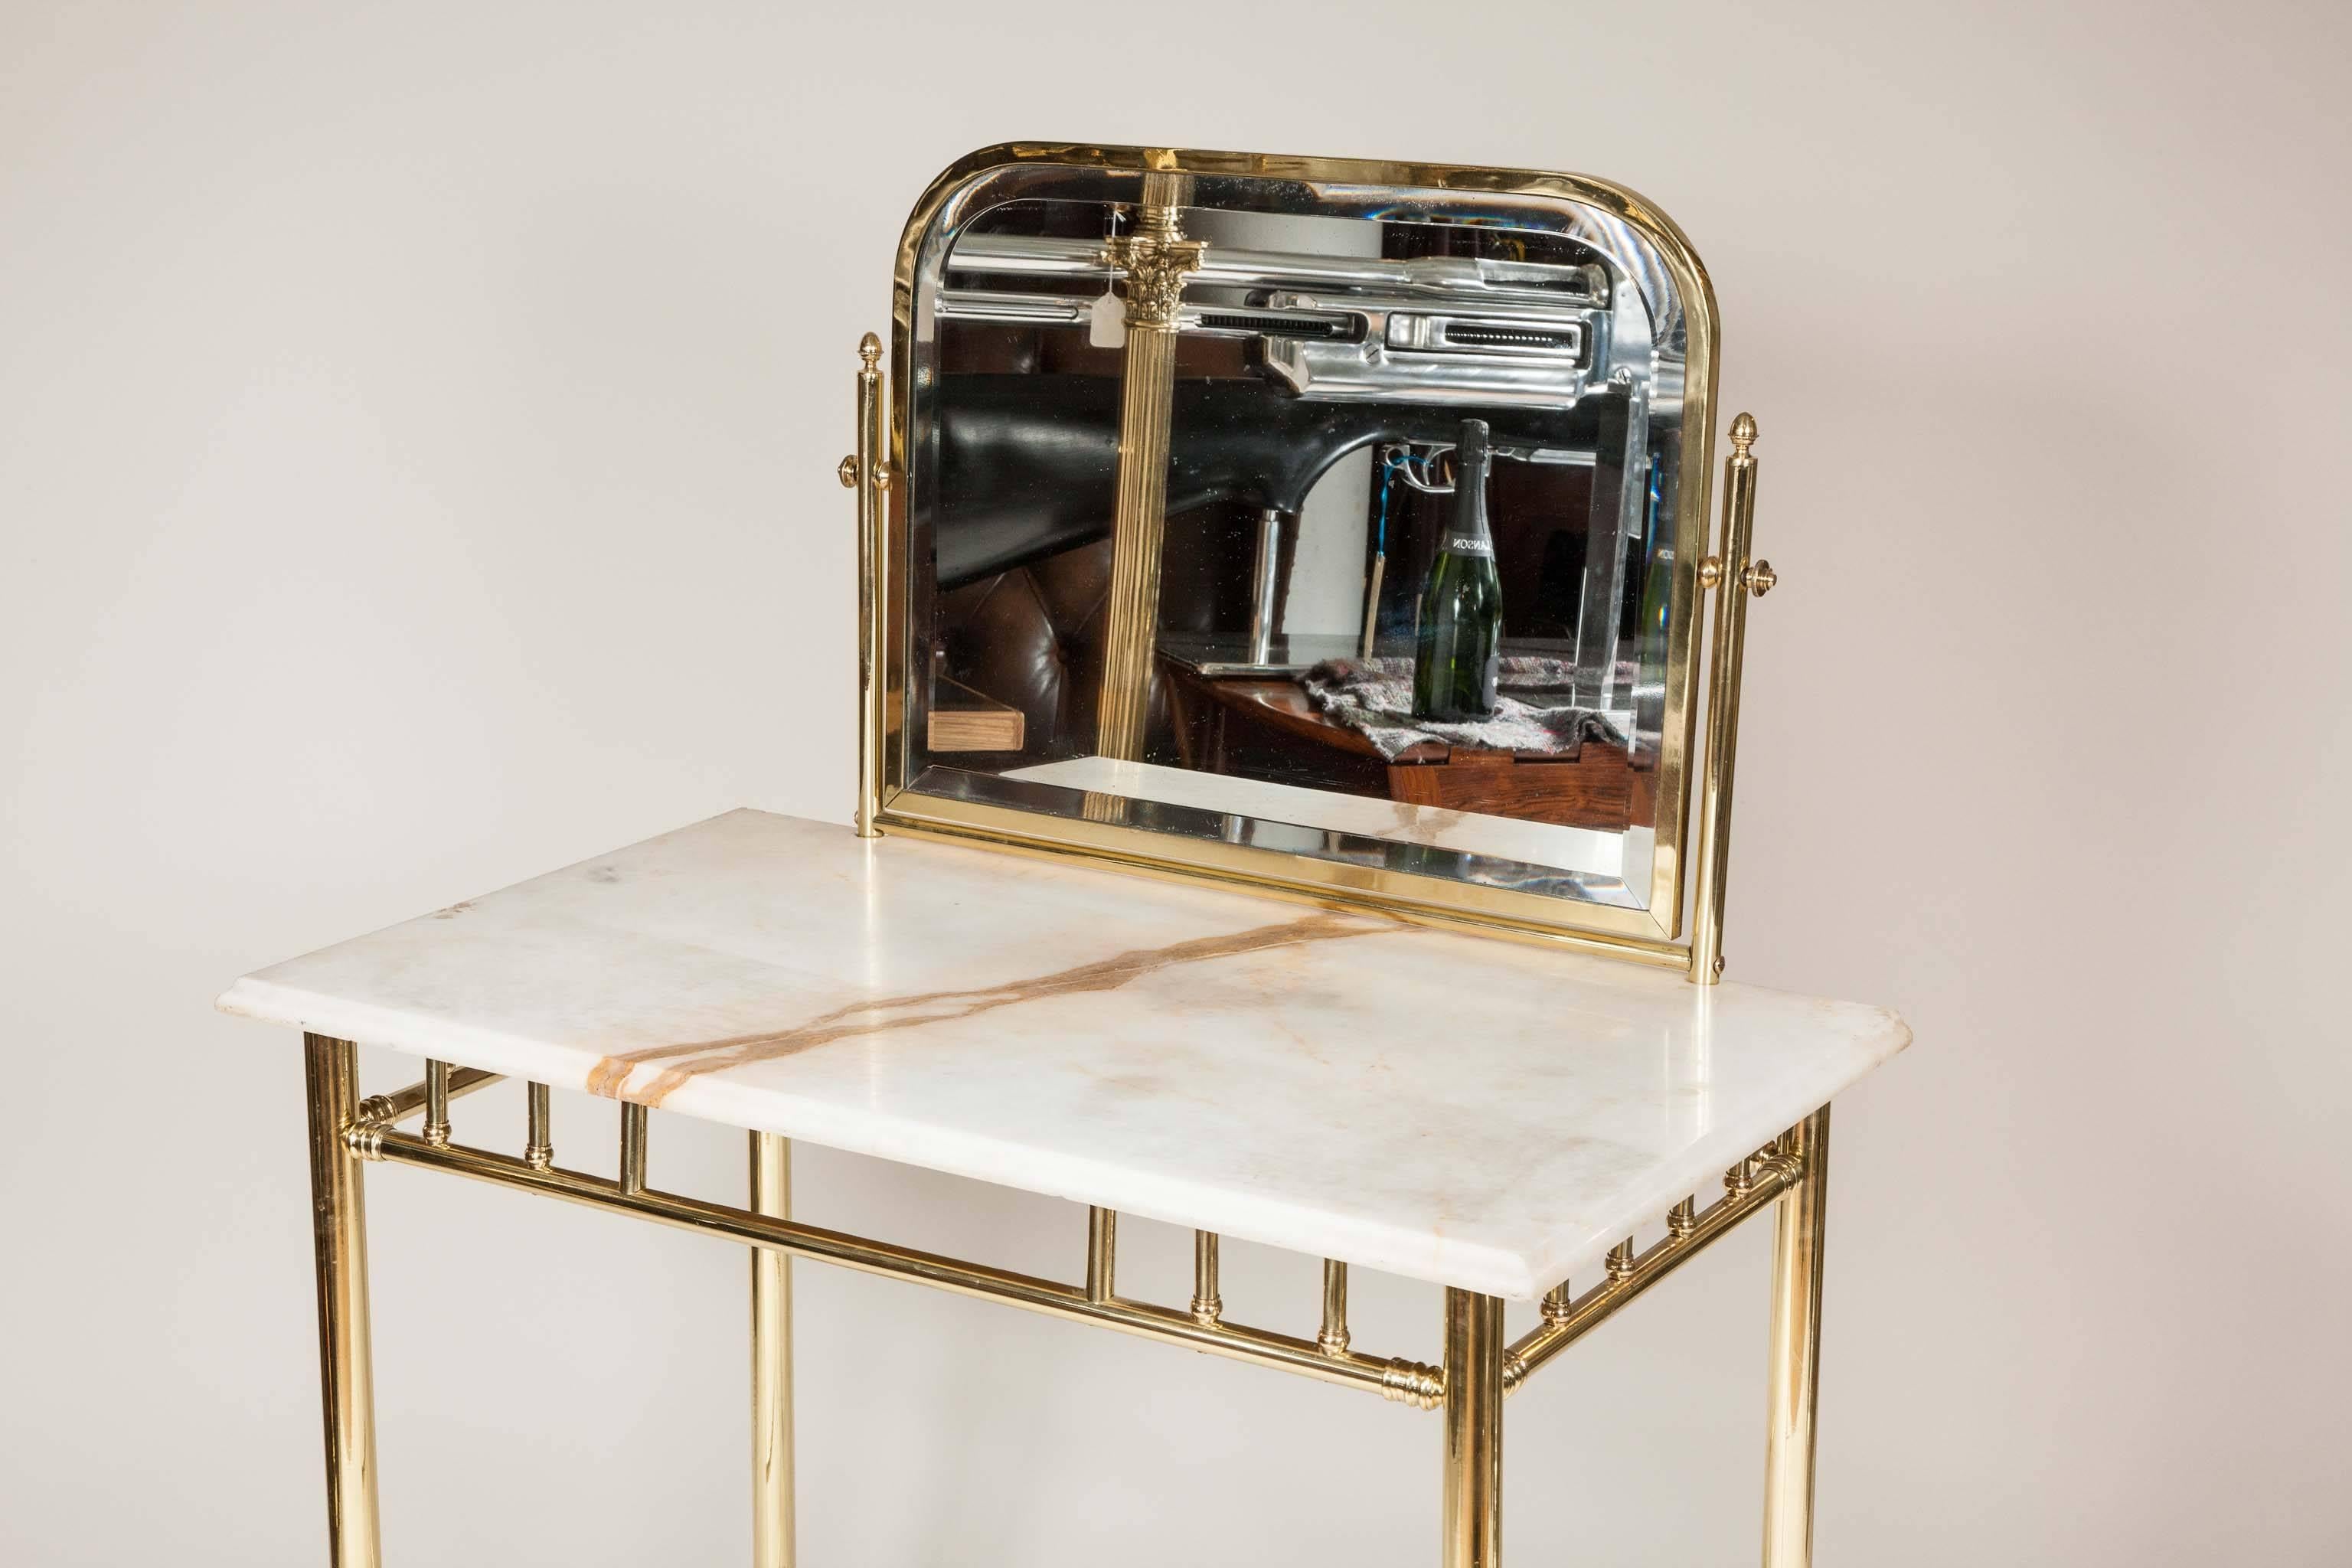 20th Century An Edwardian brass dressing table with marble top, circa 1910.